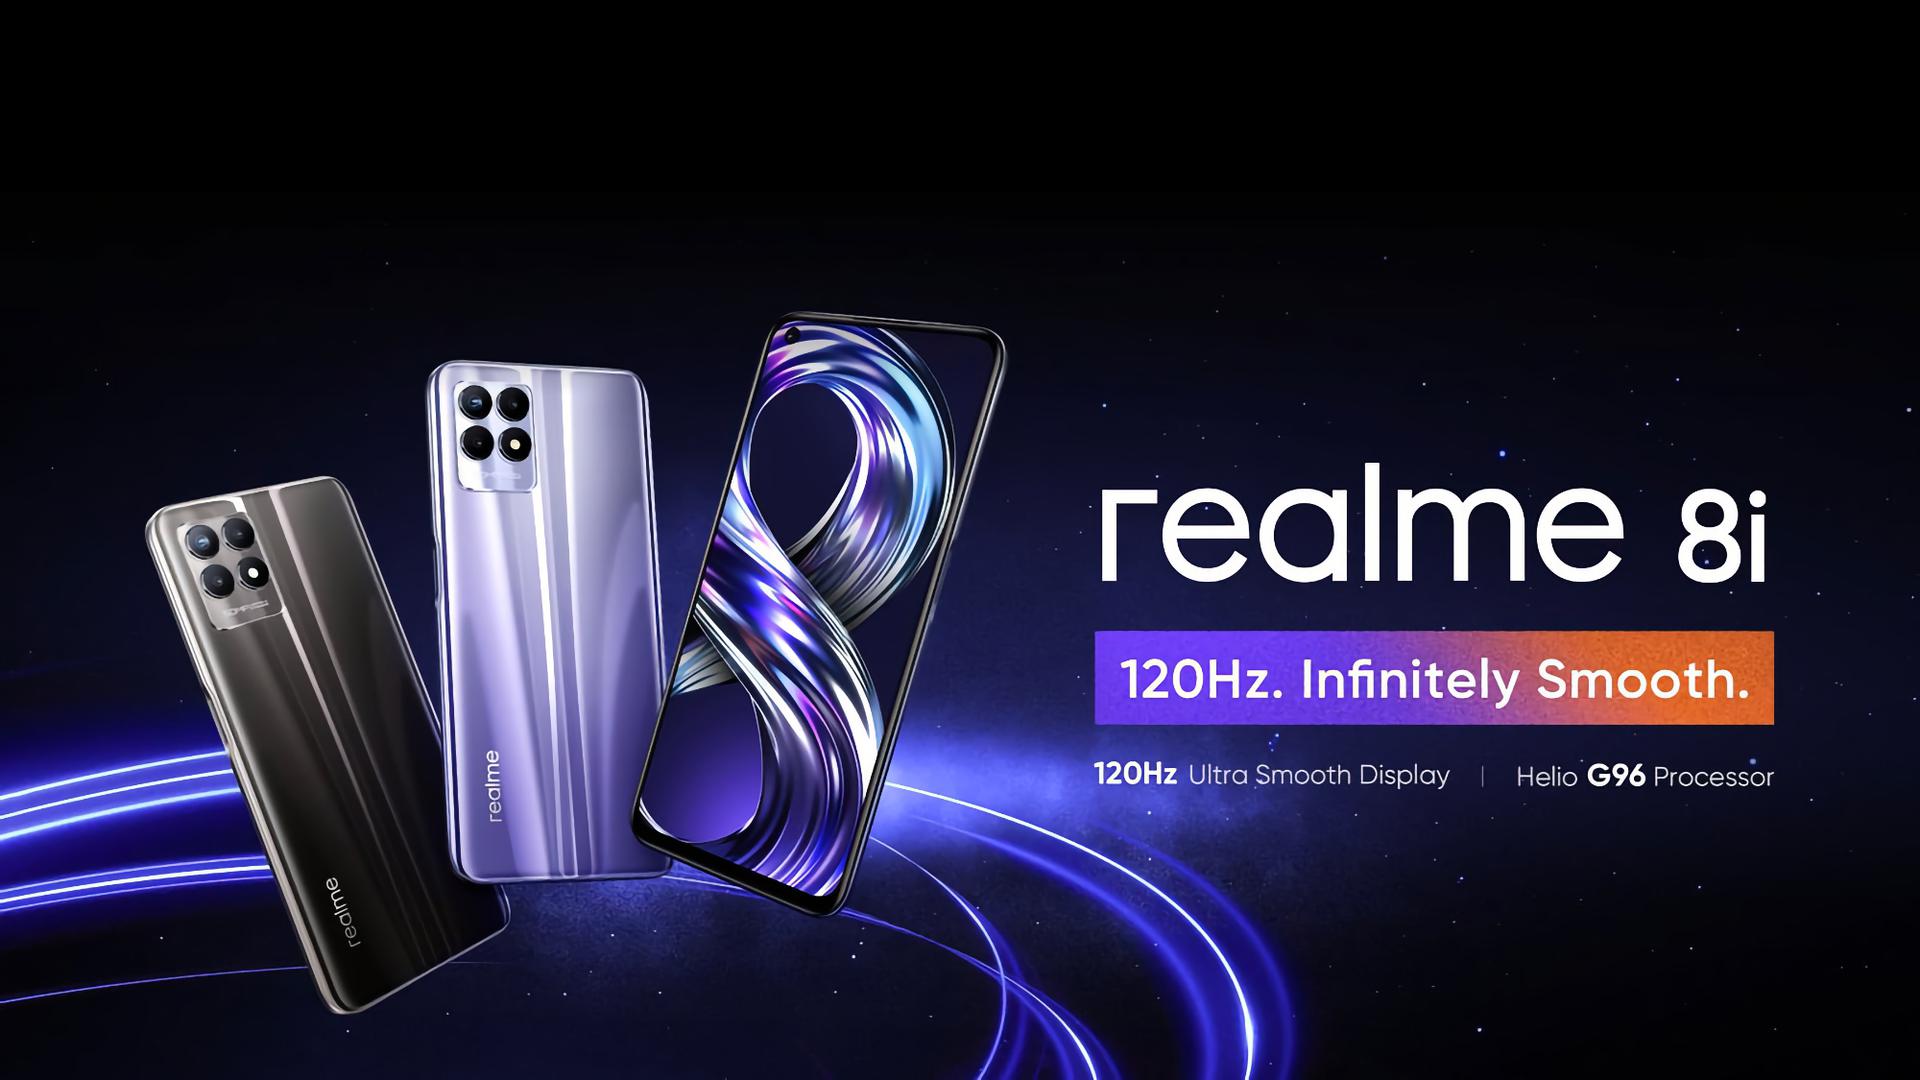 Realme 8i to be released in Europe: smartphone with NFC and MediaTek Helio G96 chip for 199 euros